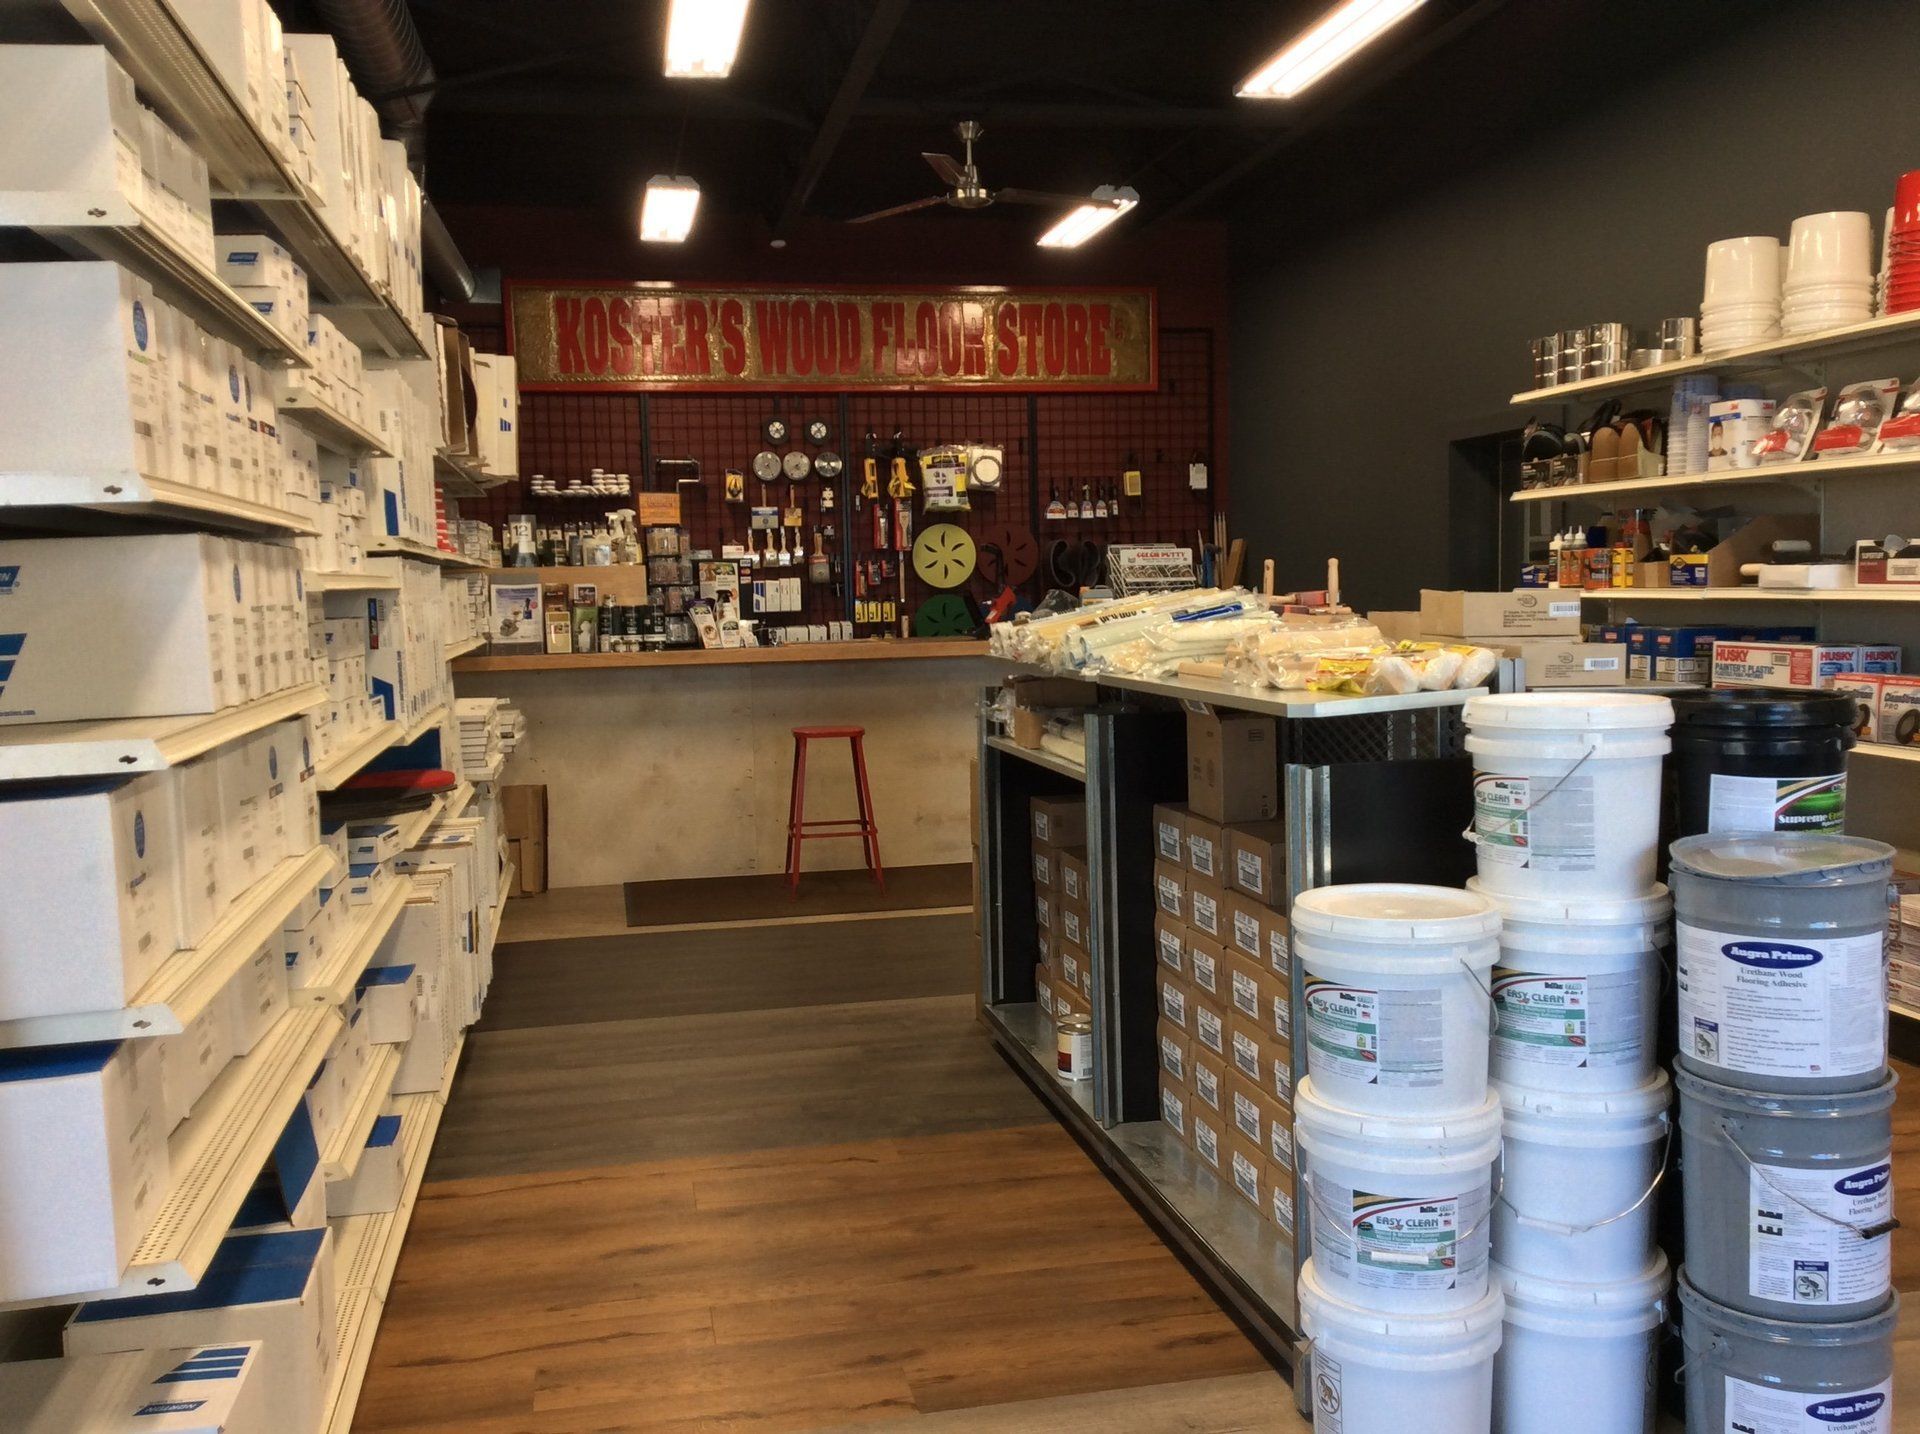 A store filled with lots of shelves and buckets of paint